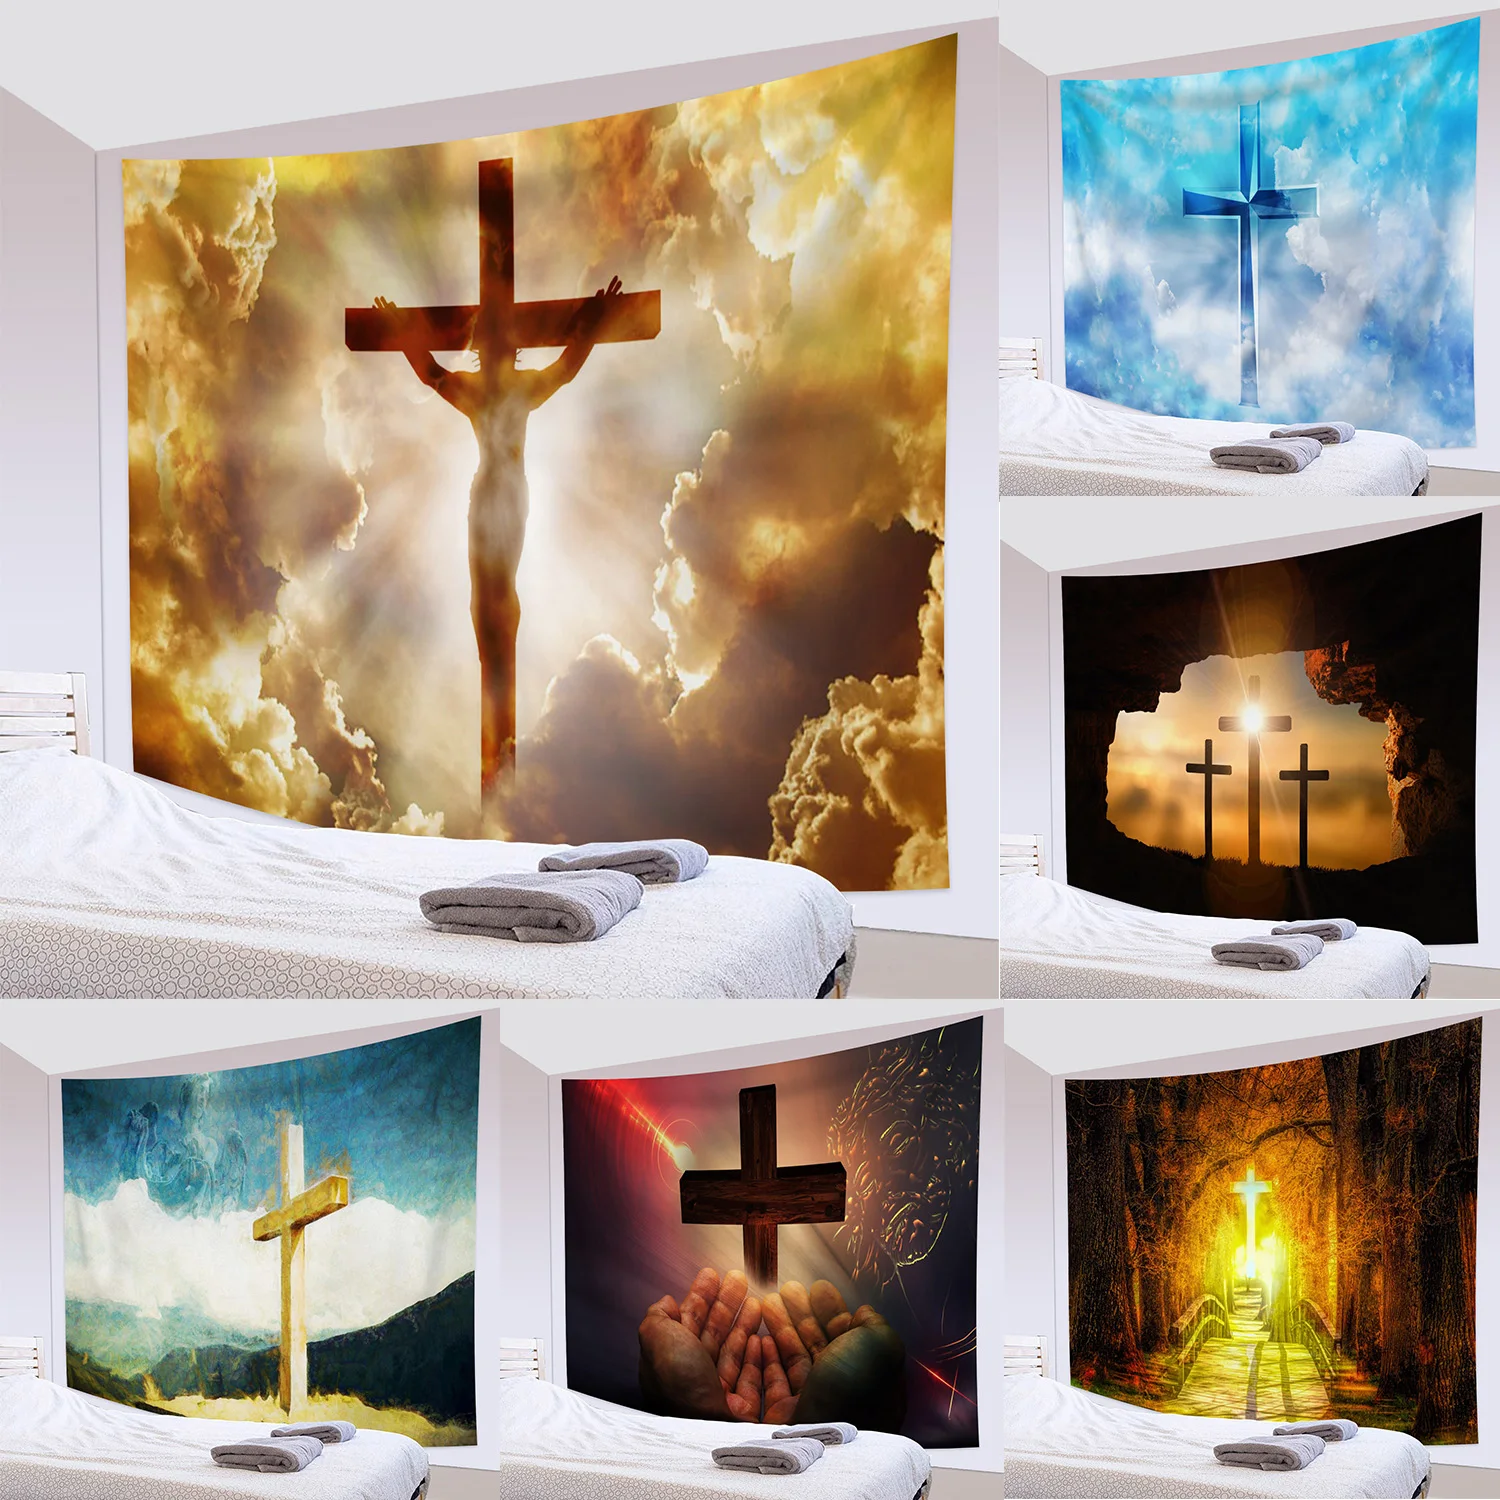 

Jesus Christ Tapestry Christian Holy Cross Tapestry Wall Hanging Easter Tapestry Bible Tapestry for Bedroom College Dorm Decor